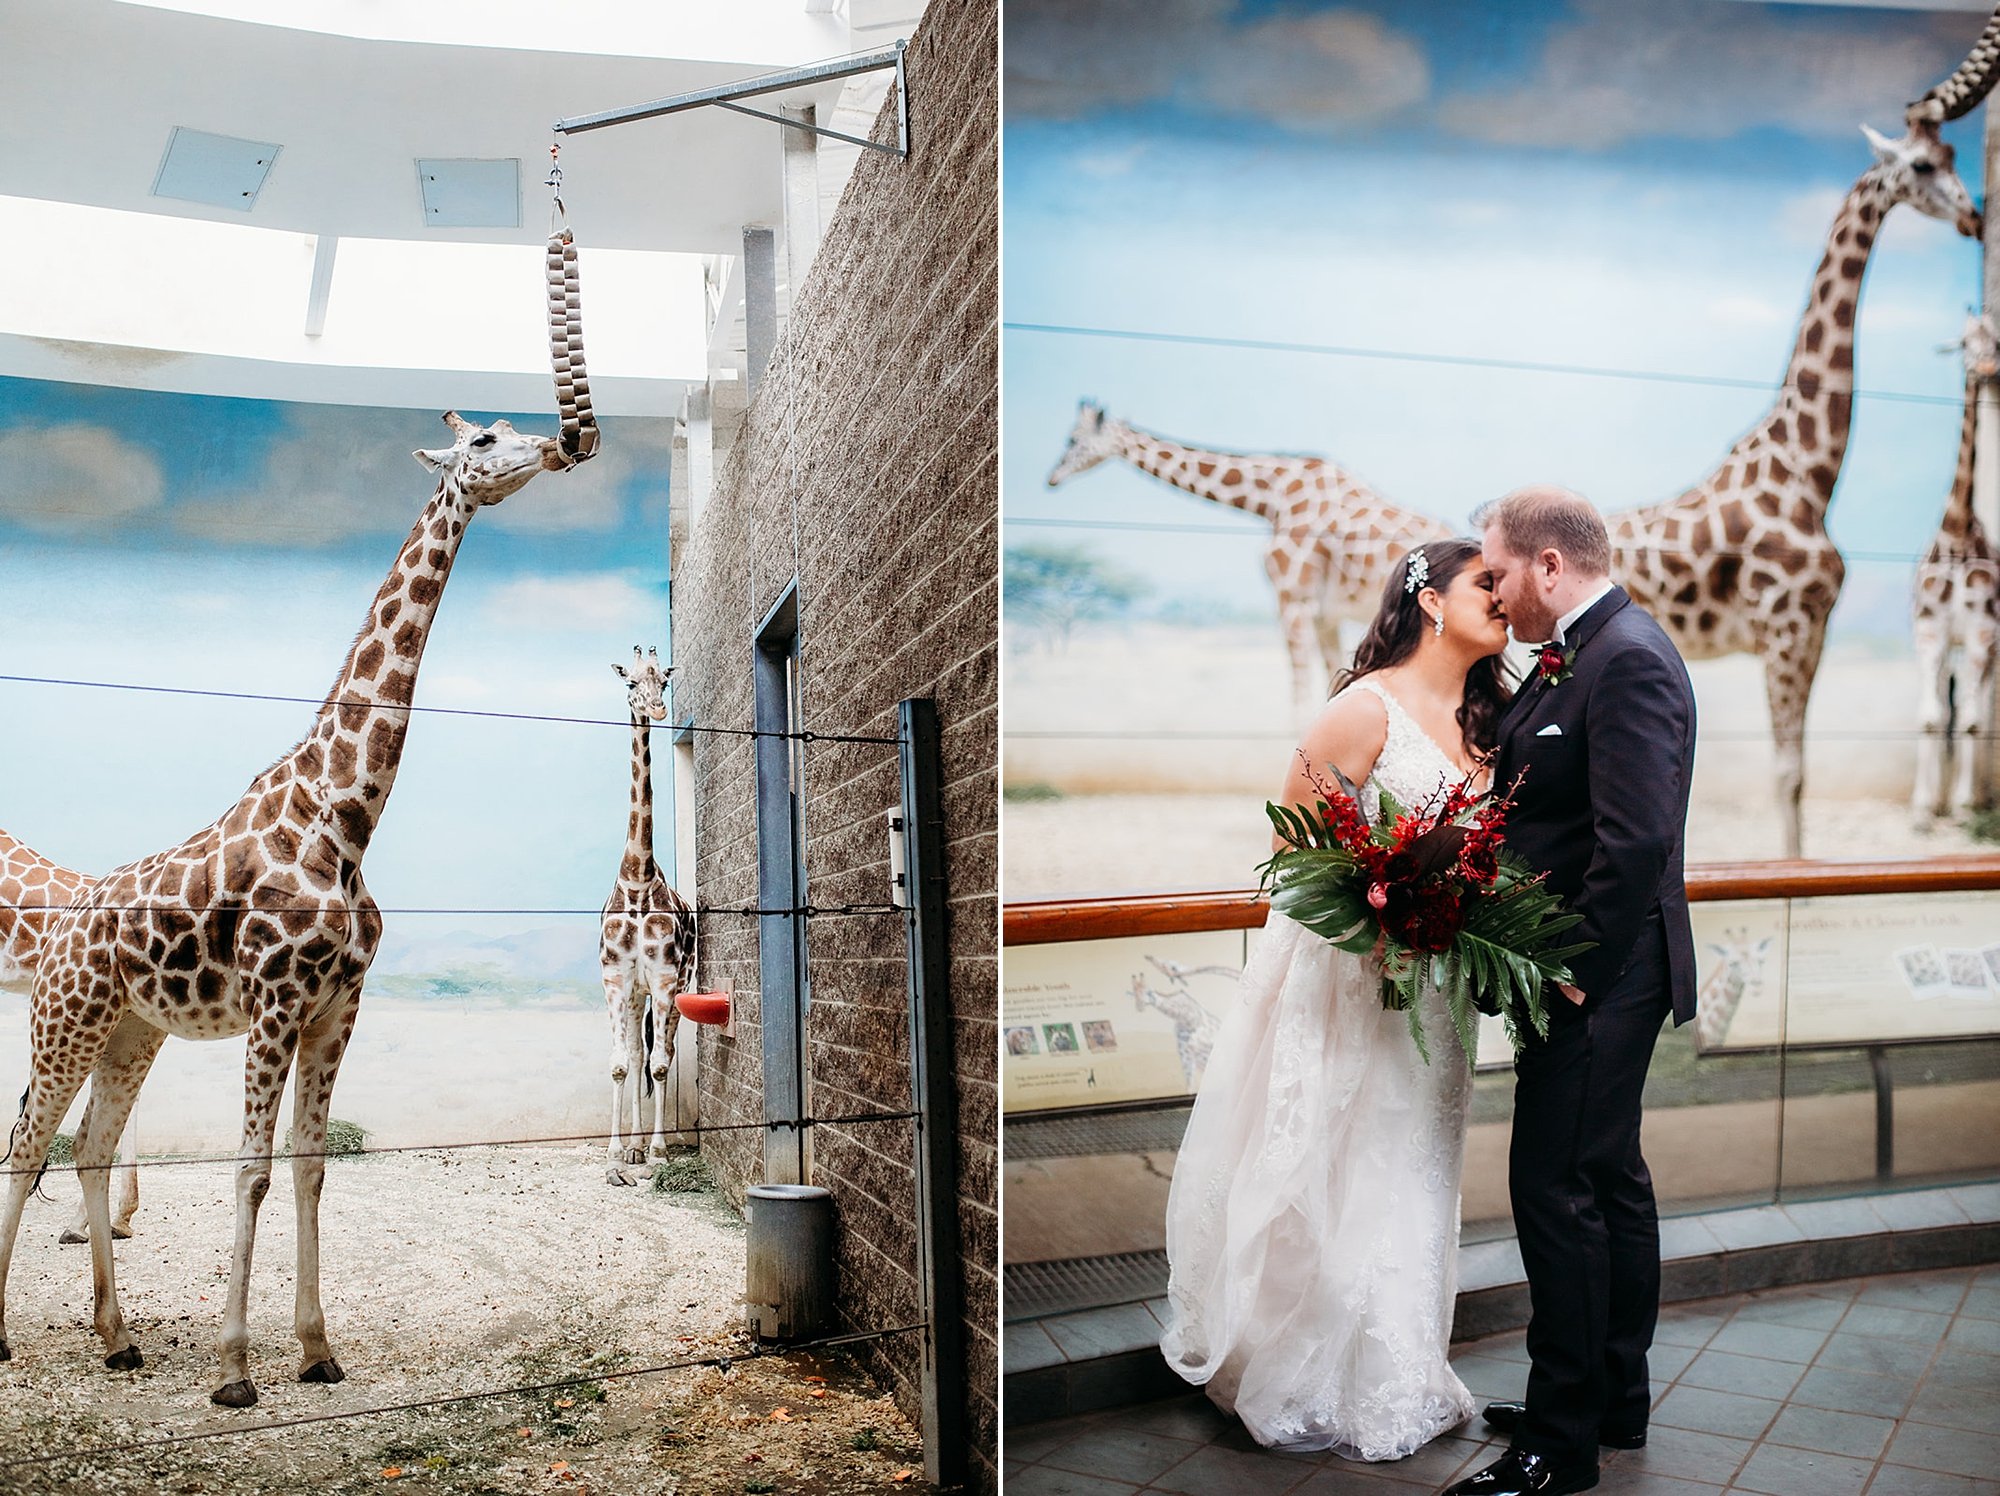 newlyweds kiss during portraits by the giraffe display at the Bronx Zoo